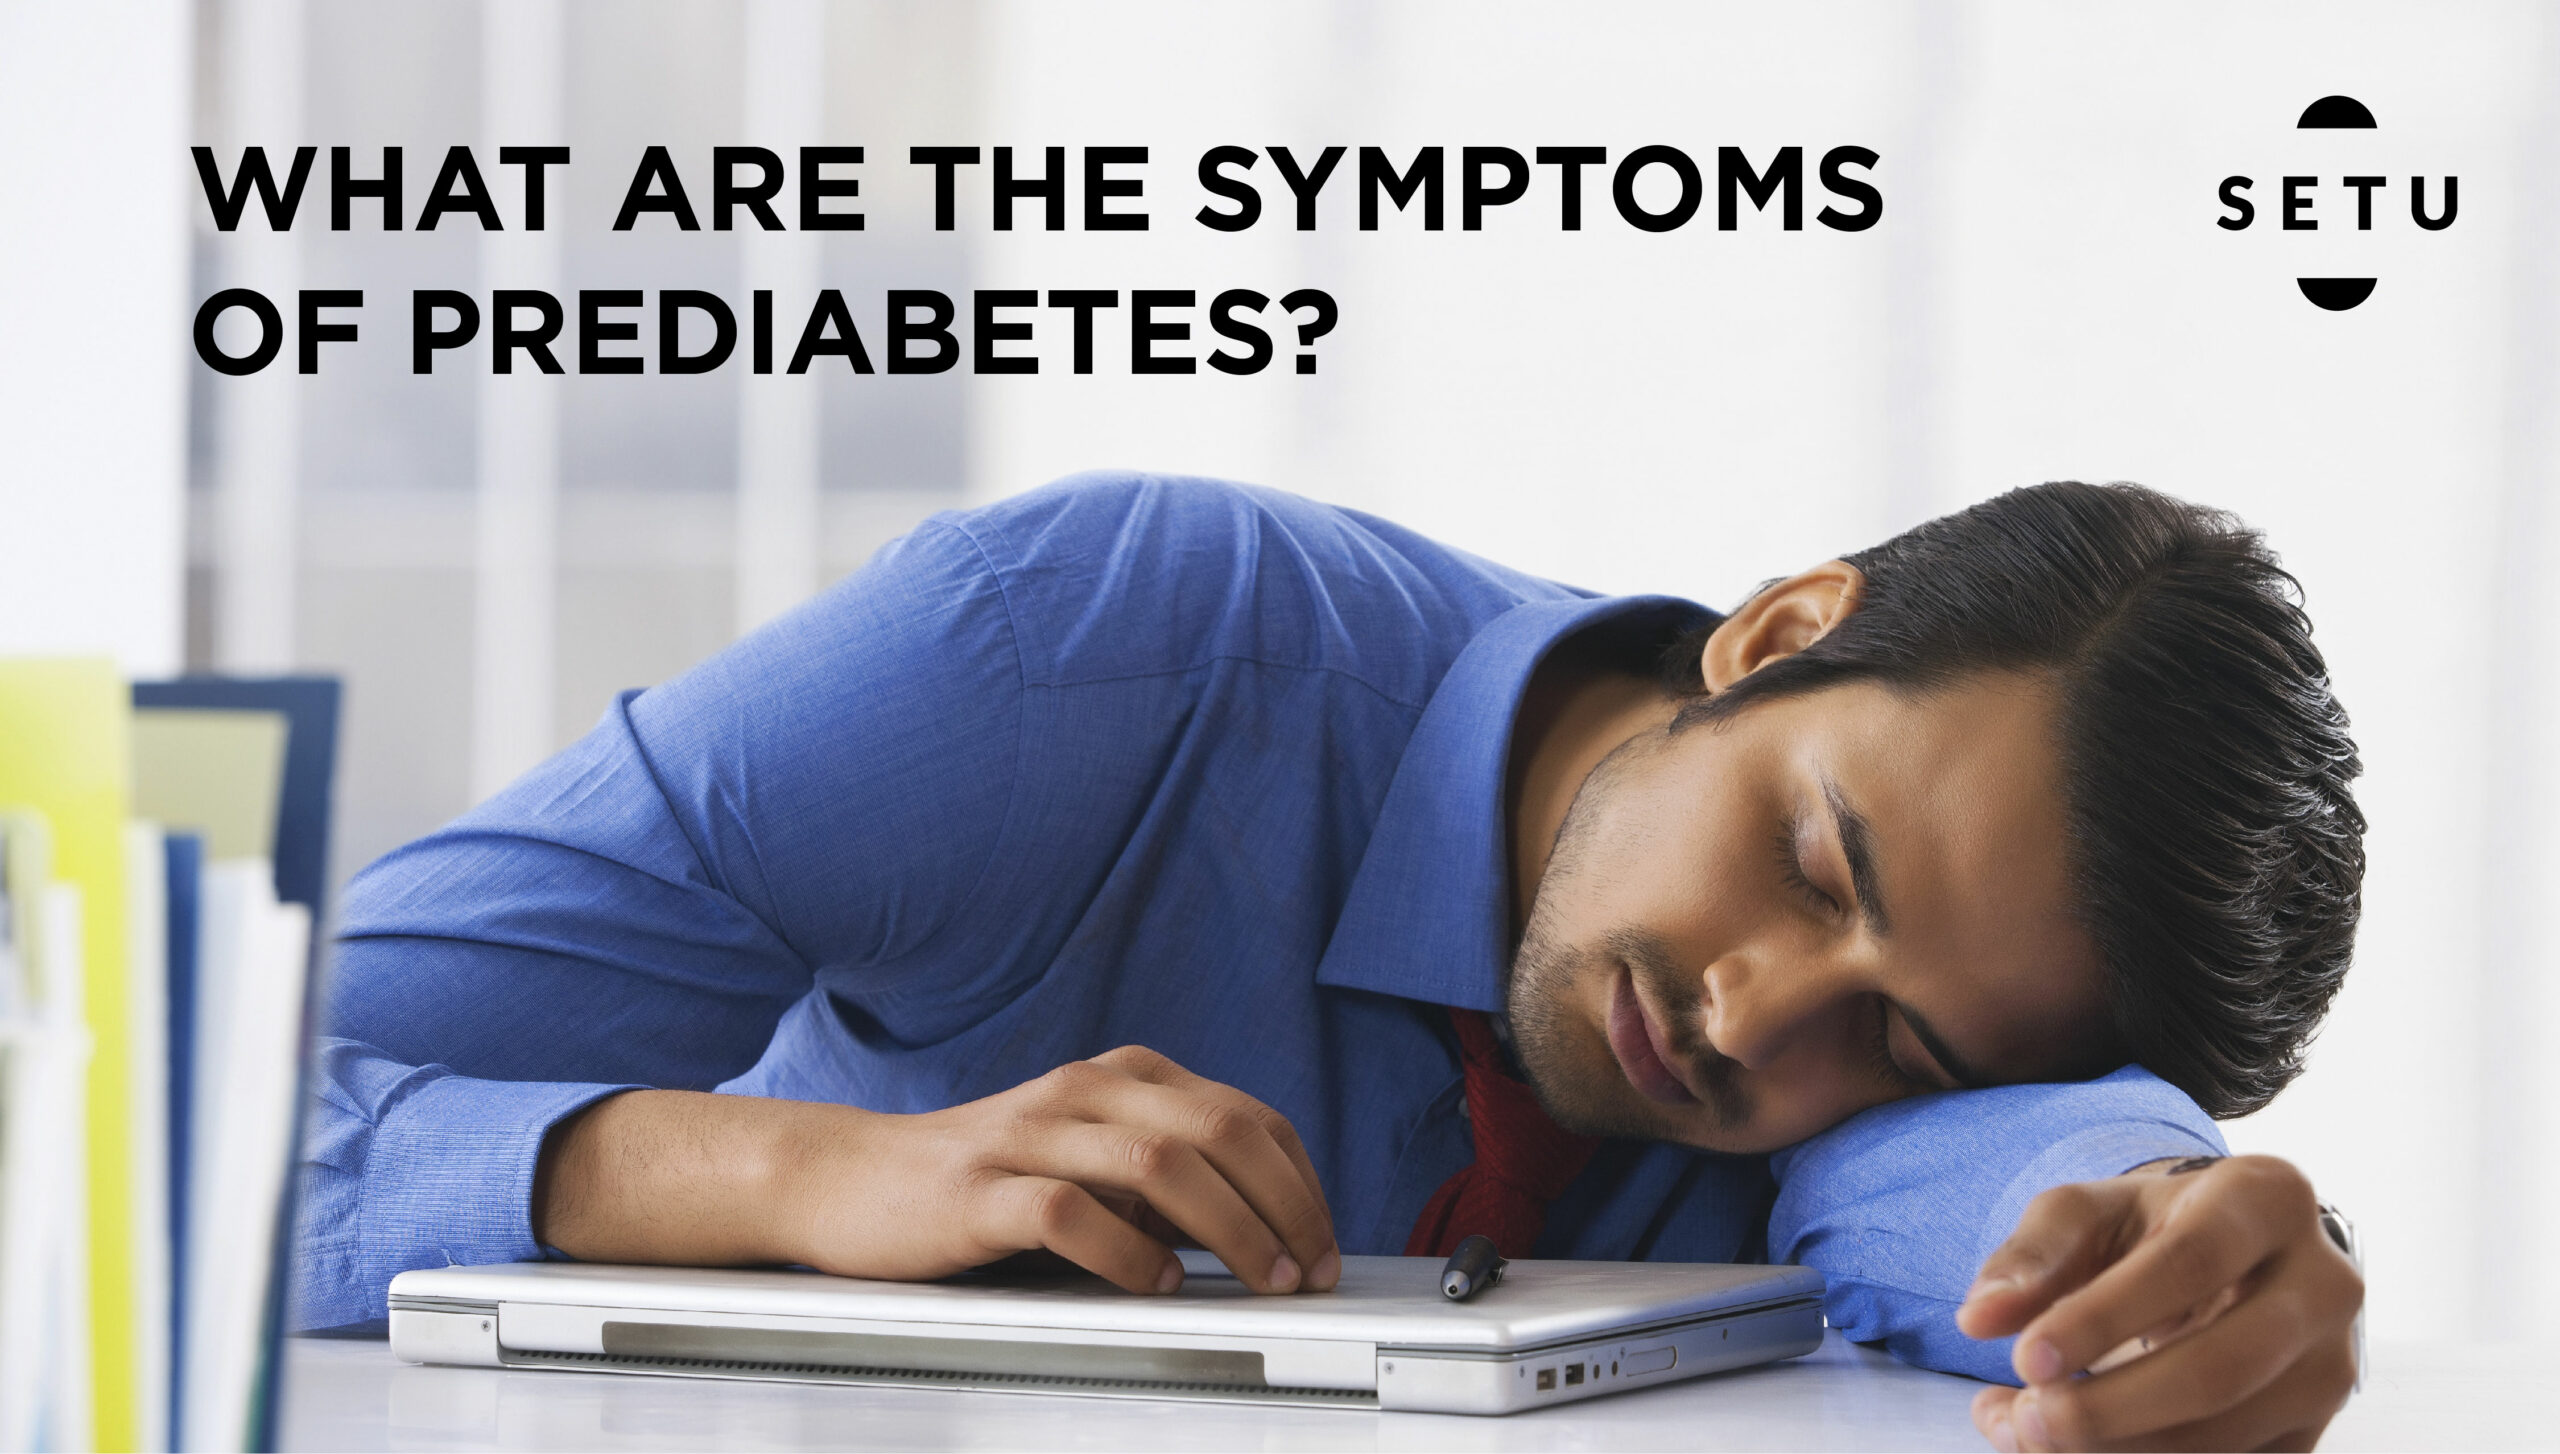 What Are The Symptoms Of Prediabetes?